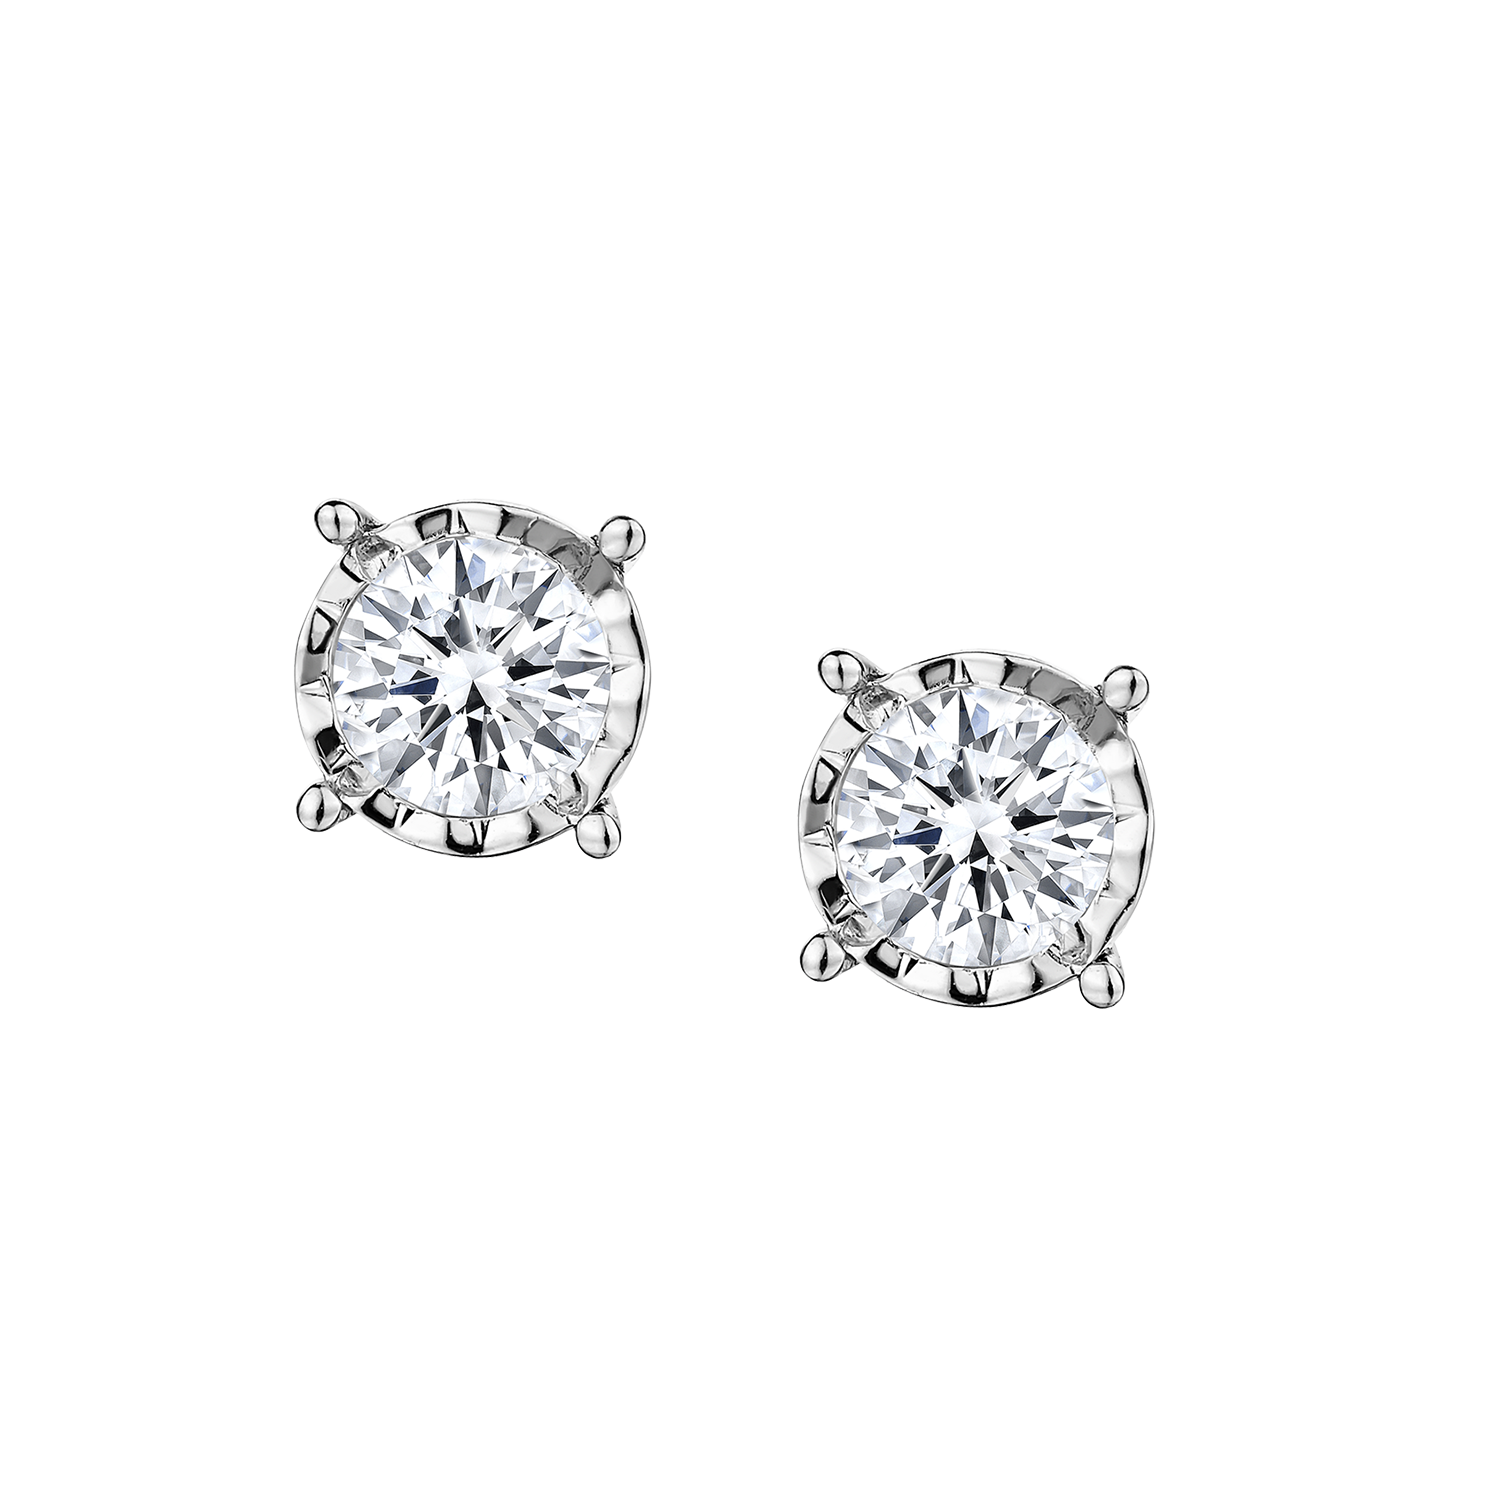 .75 Carat of Diamonds "Miracle" Earrings, 14kt White Gold.....................NOW